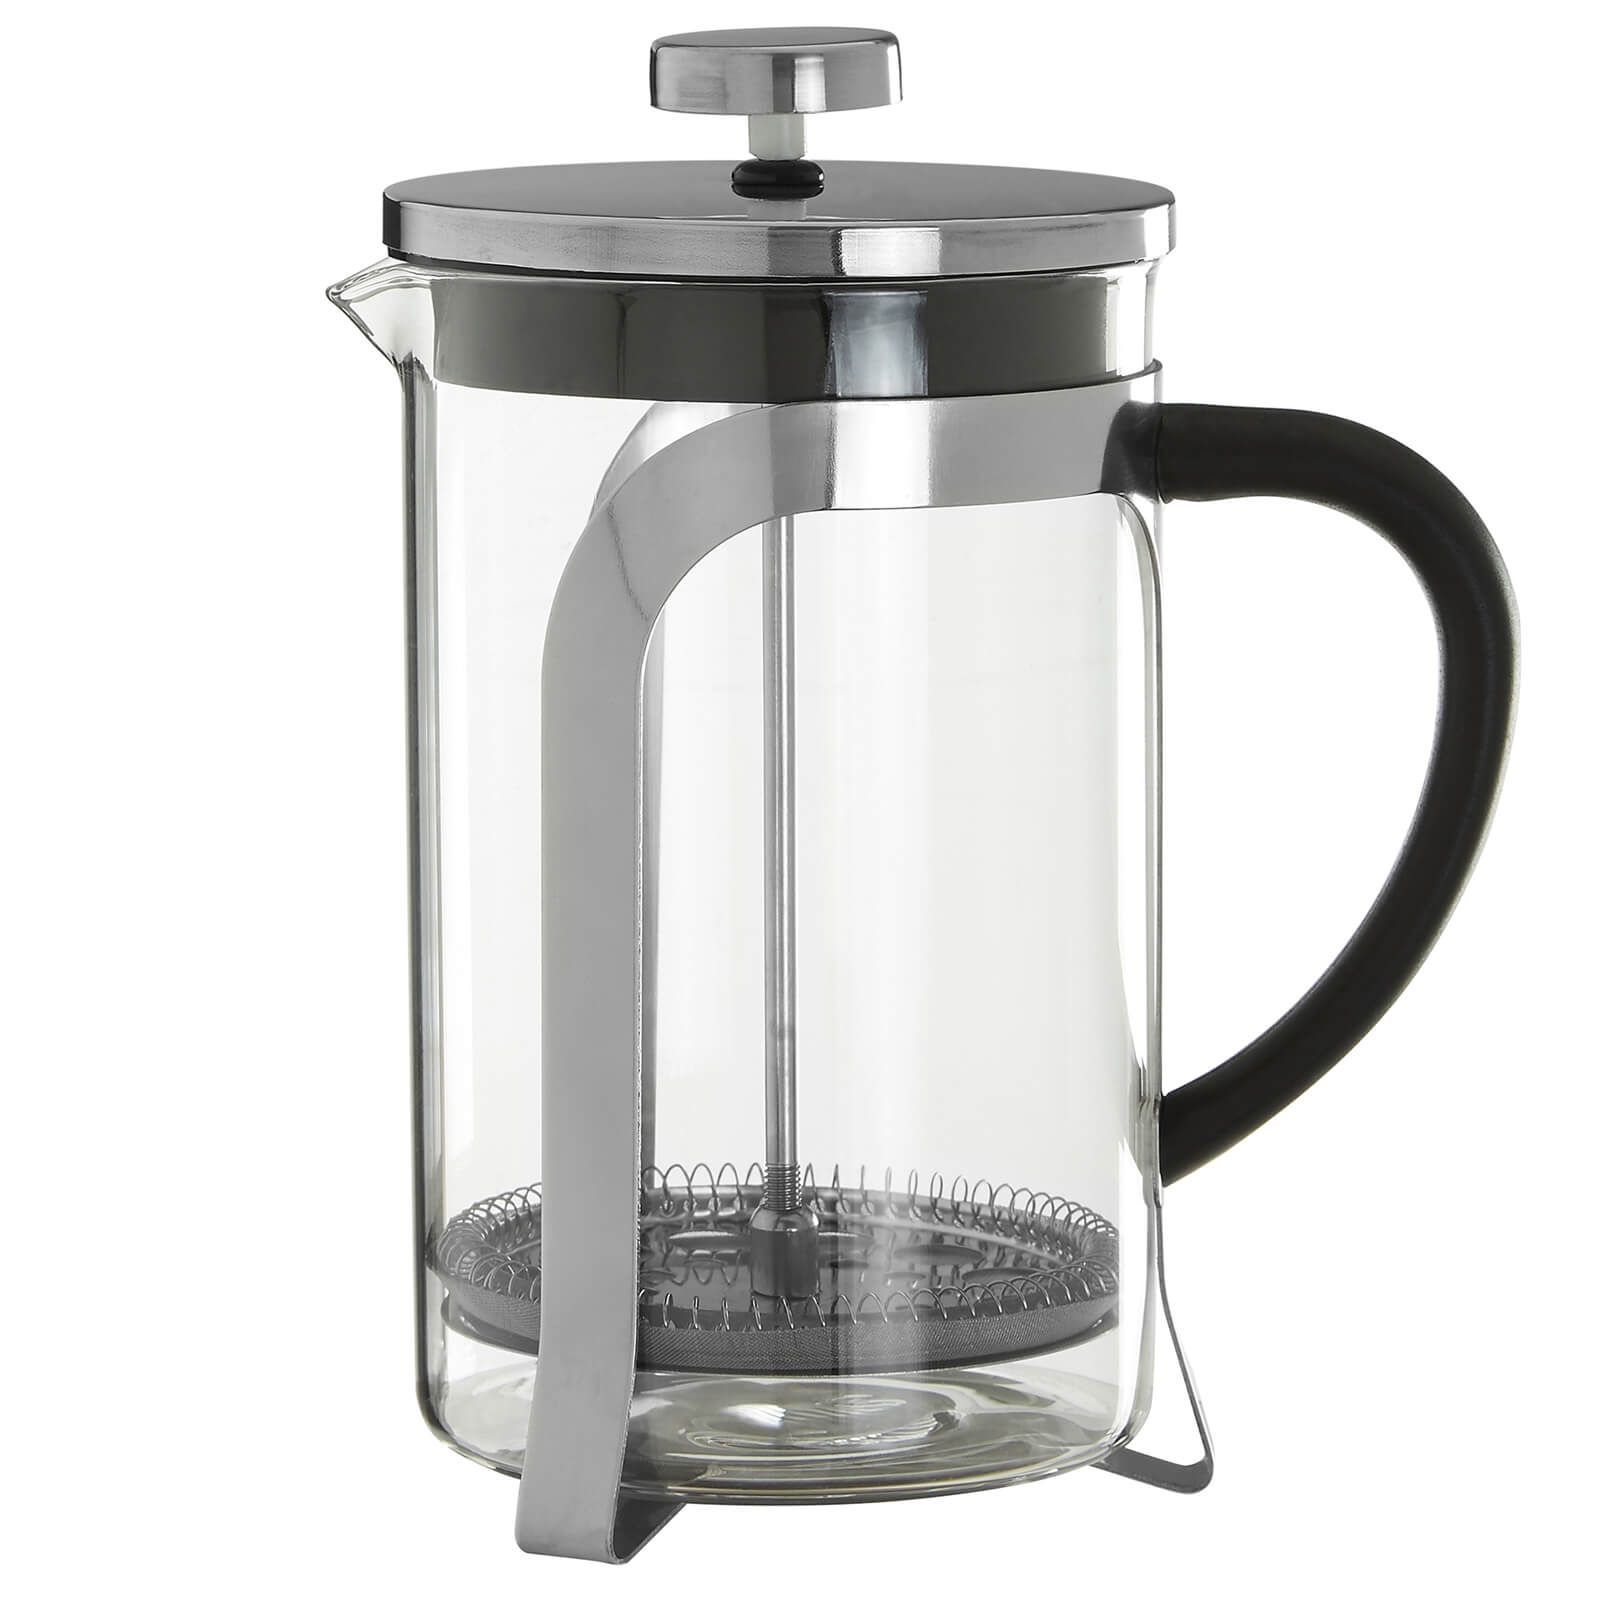 Akeala Cafetiere - 800ml - Stainless Steel